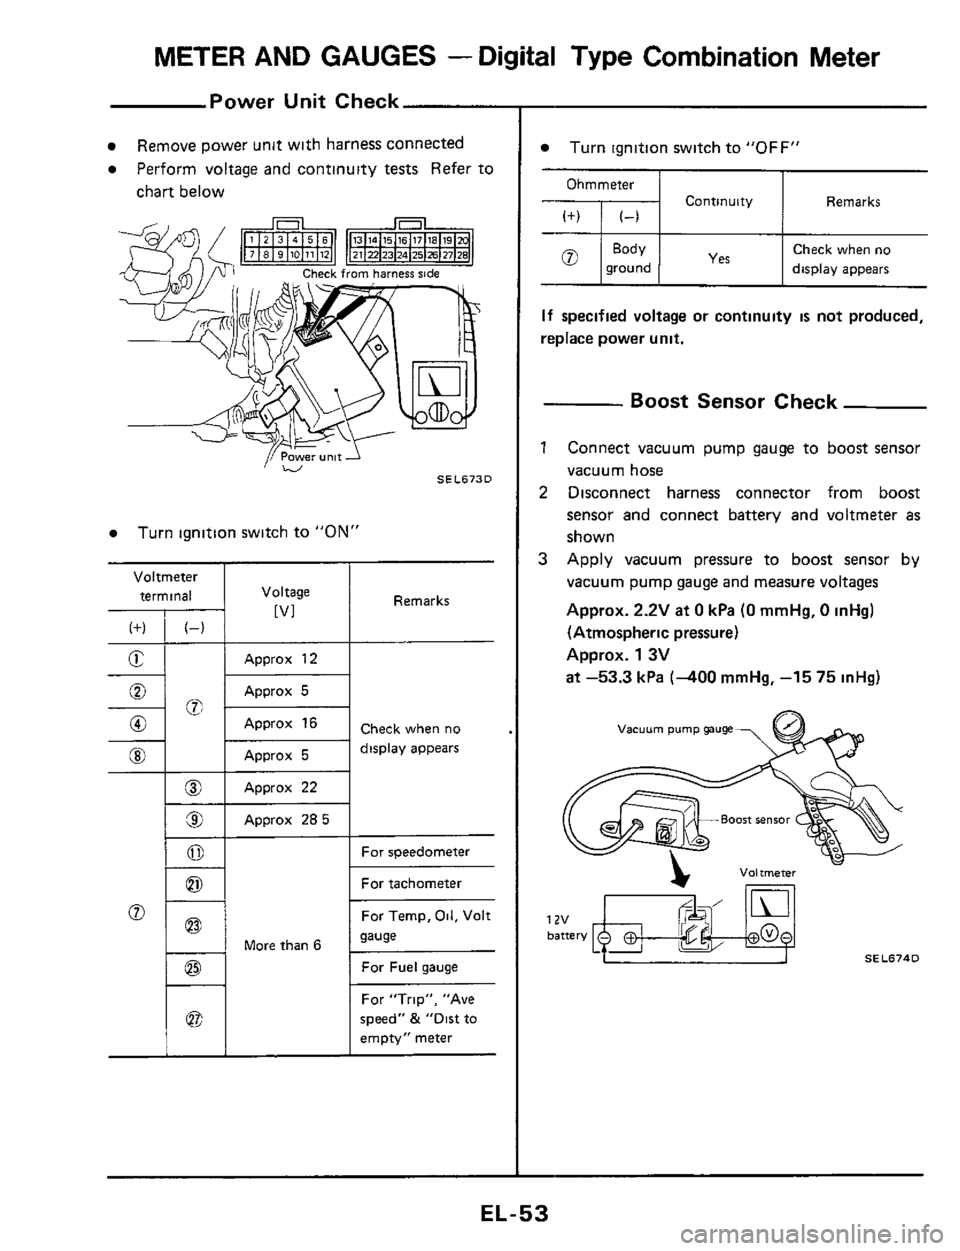 NISSAN 300ZX 1984 Z31 Electrical System User Guide METER AND GAUGES - Digital Type Combination Meter 
Power Unit Check 
Voltmeter 
terminal 
(f) (-) 
E - 
-%; 0 
0 
@I 
__ 
@ 
9 
0 
0 
Remove  power unit with  harness  connected 
Perform  voltage and 